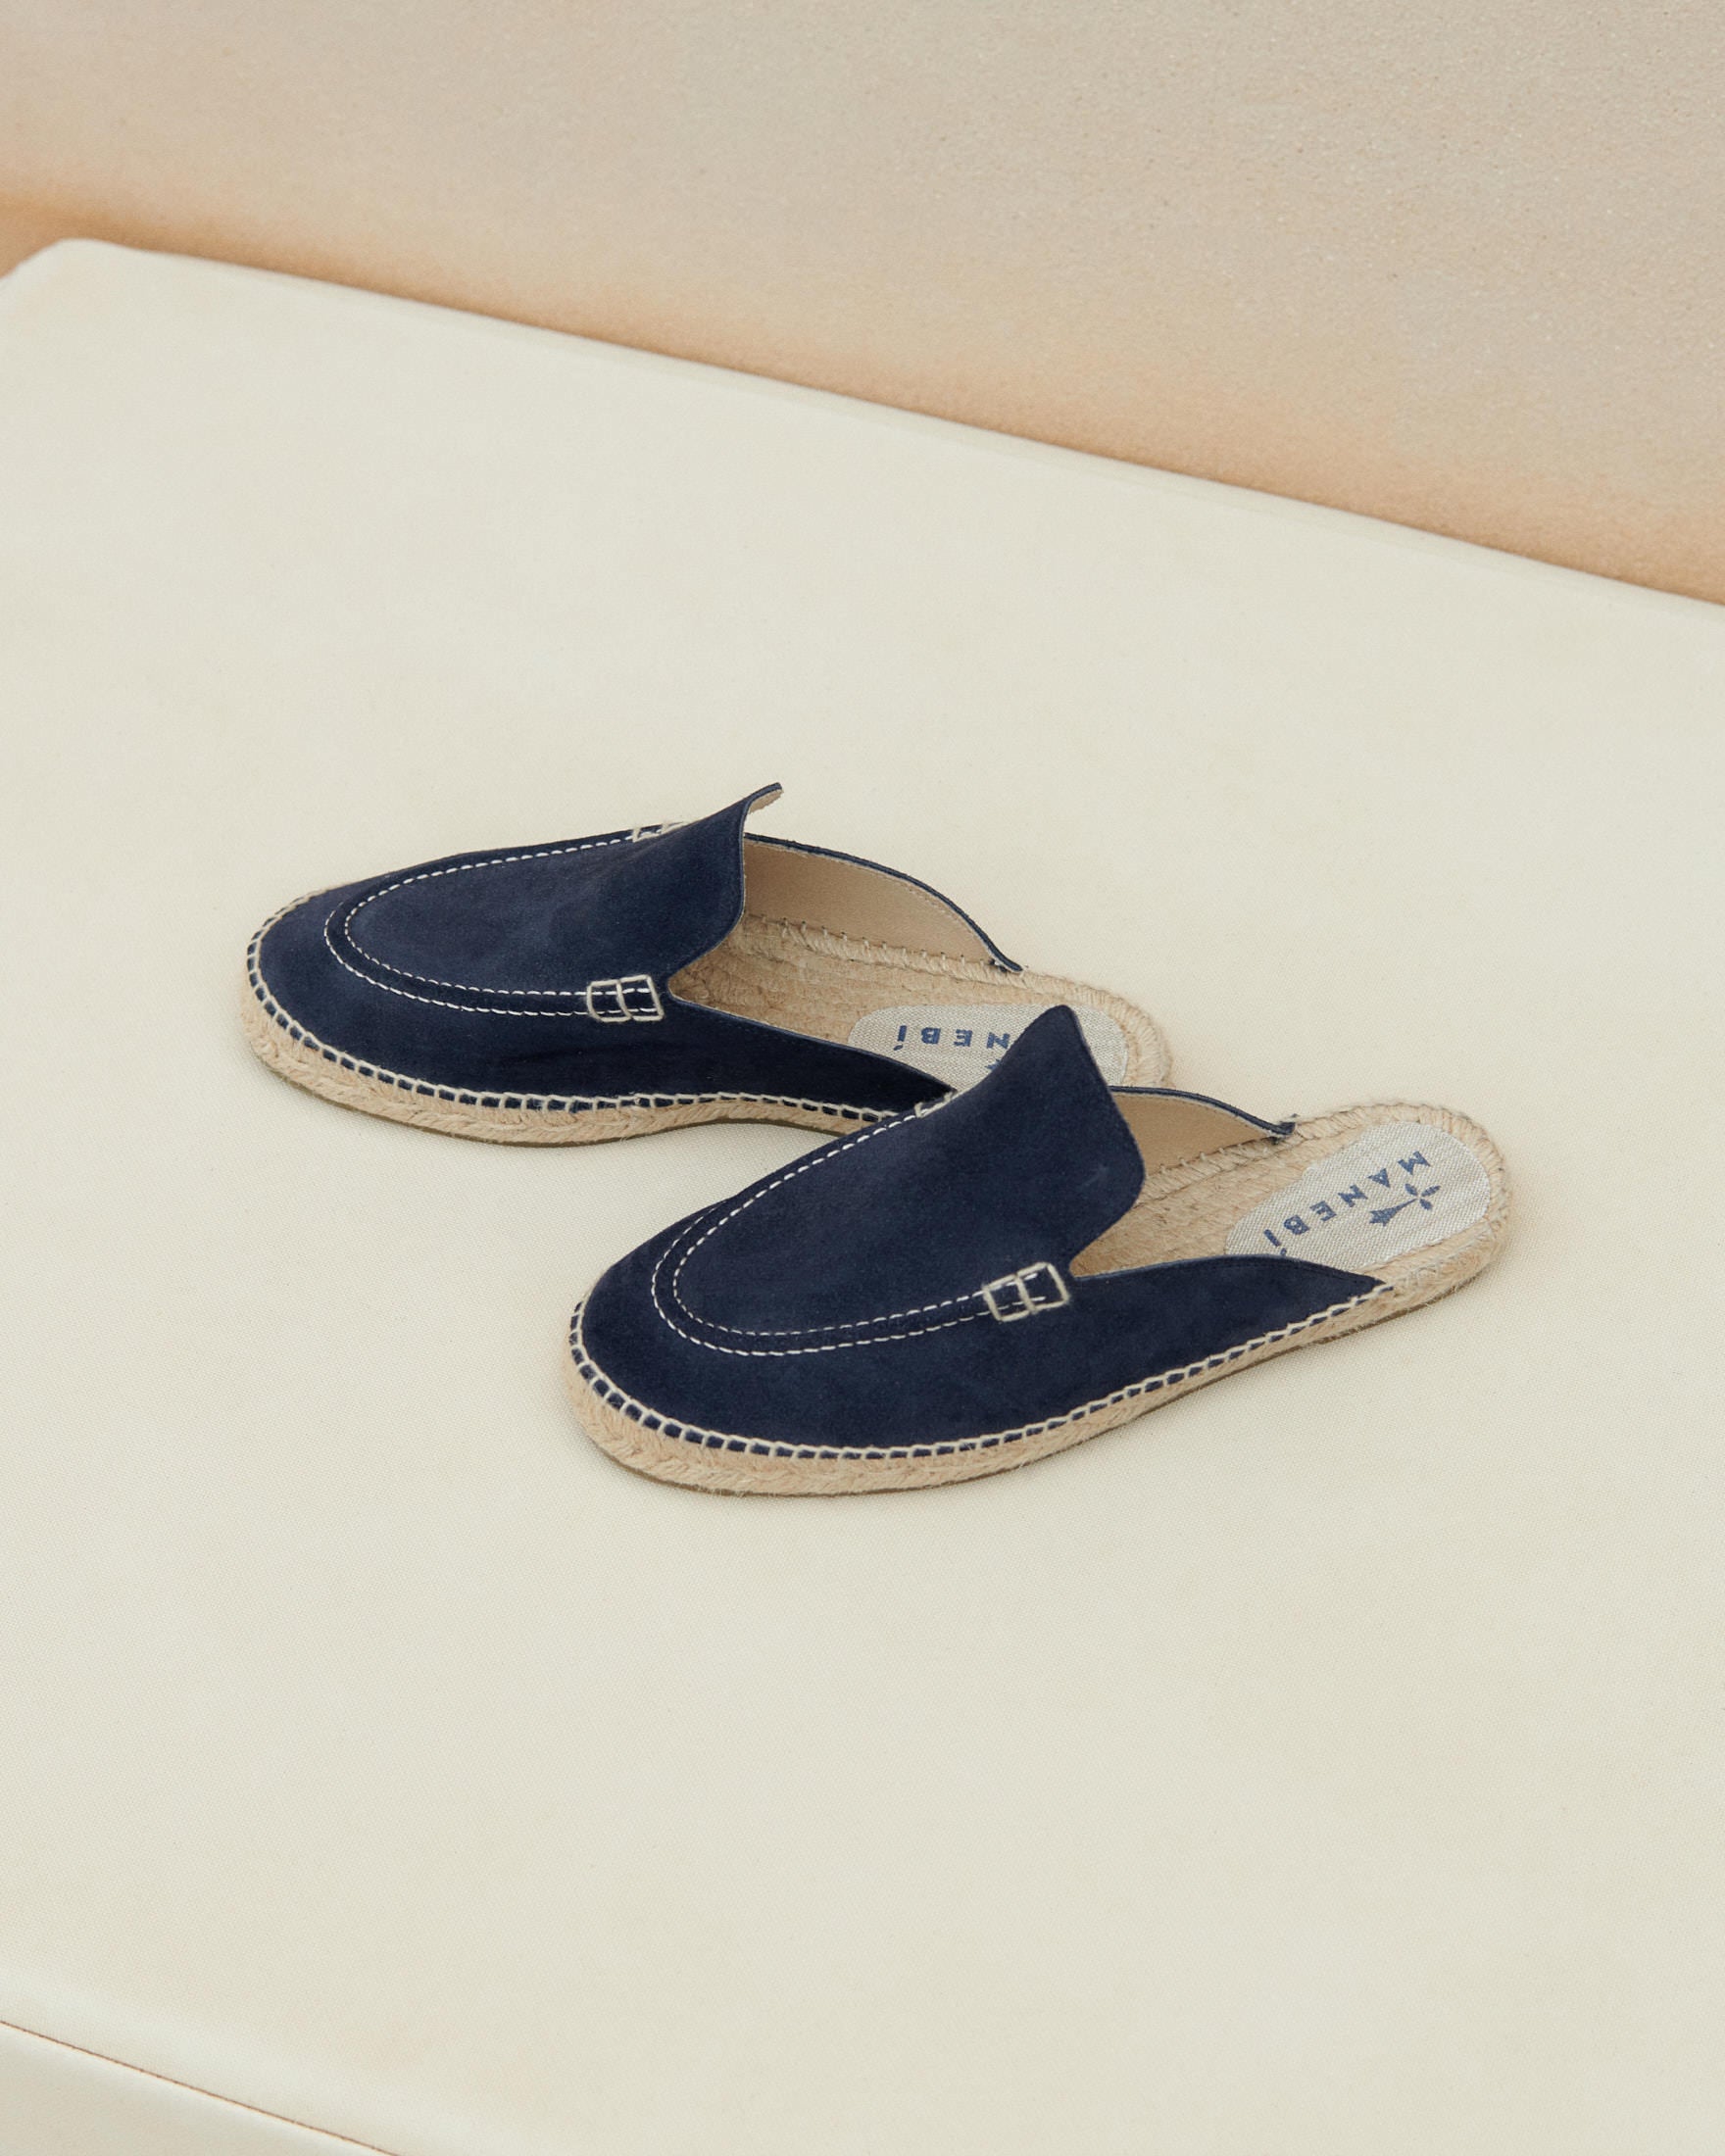 Traveler Loafers Mules - Patriot Blue